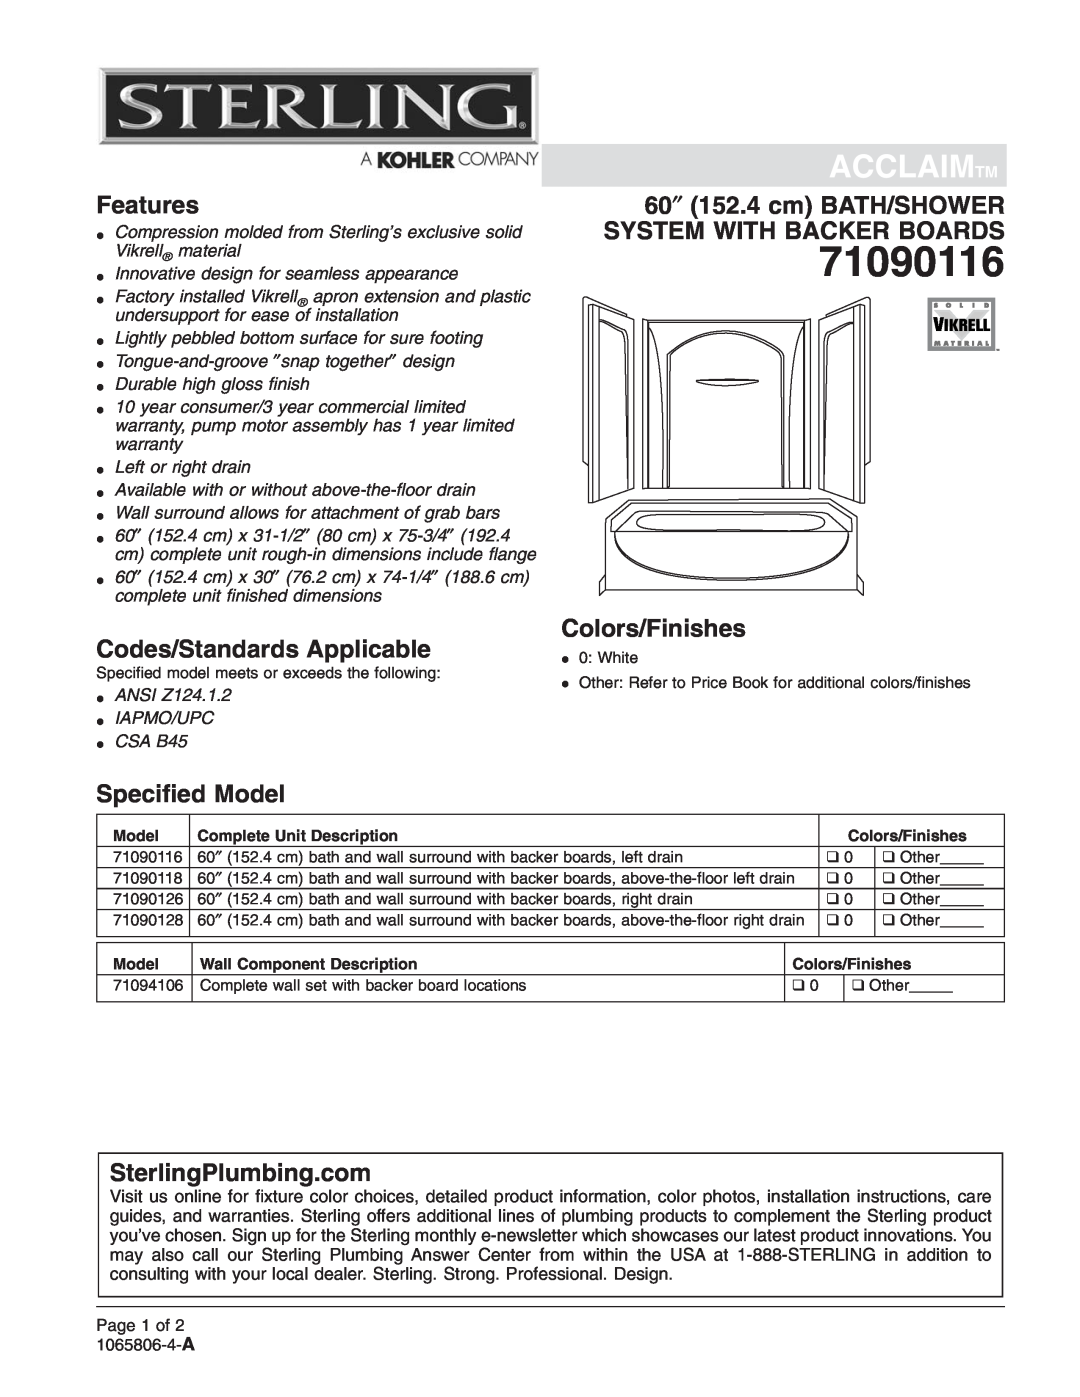 Sterling Plumbing 71090116 warranty Acclaimtm, Features, Codes/Standards Applicable, 60″ 152.4 cm BATH/SHOWER 